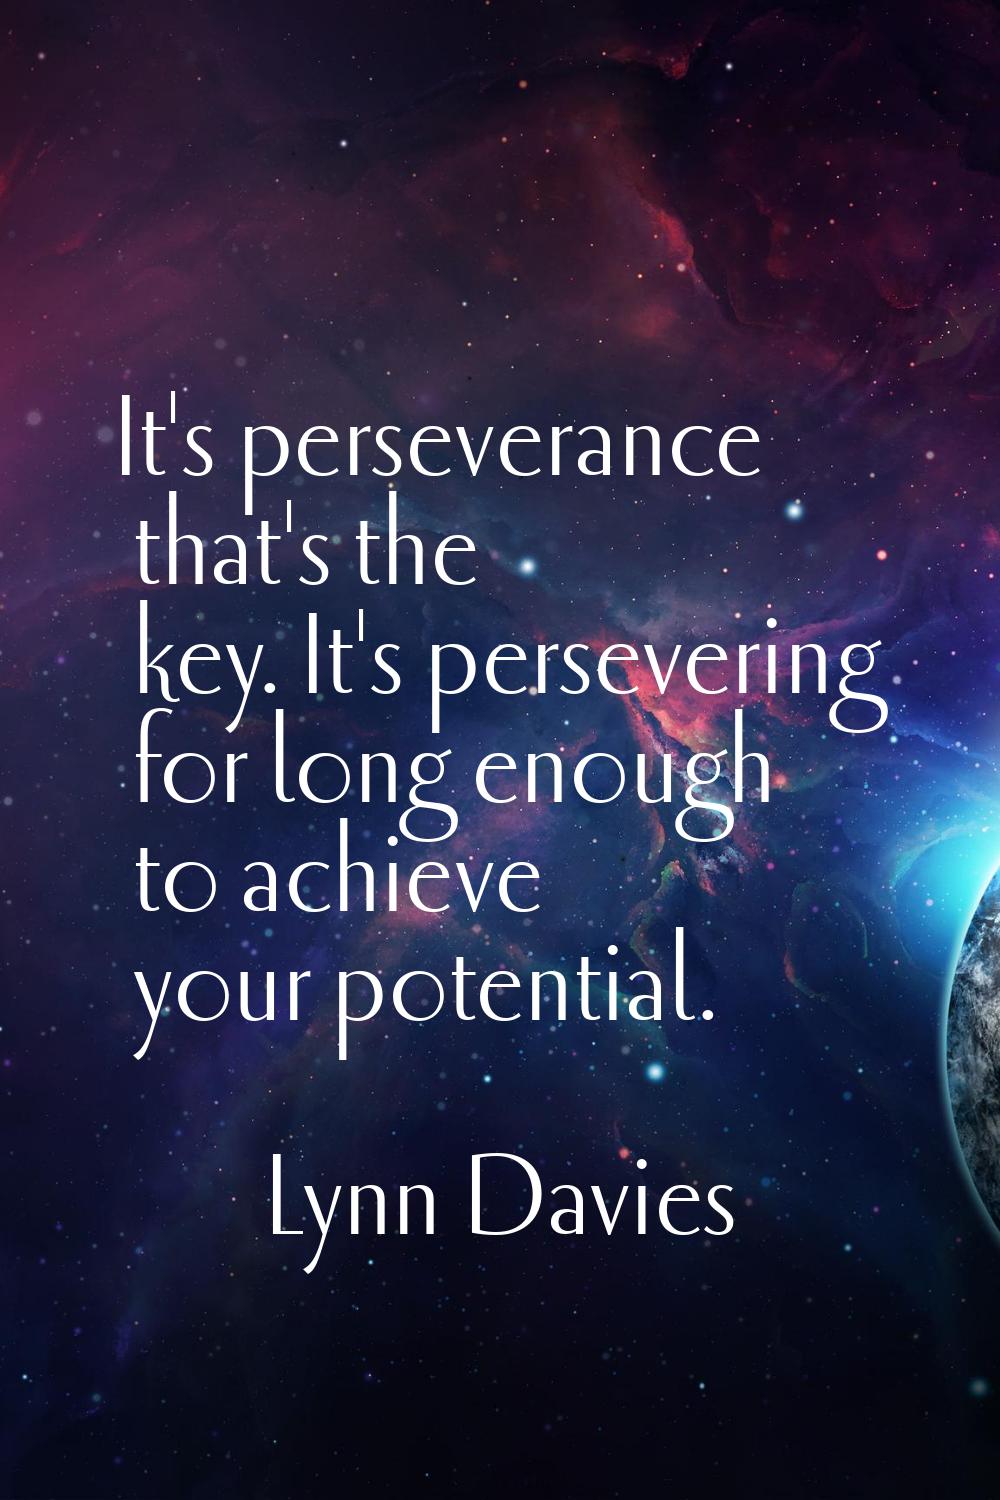 It's perseverance that's the key. It's persevering for long enough to achieve your potential.